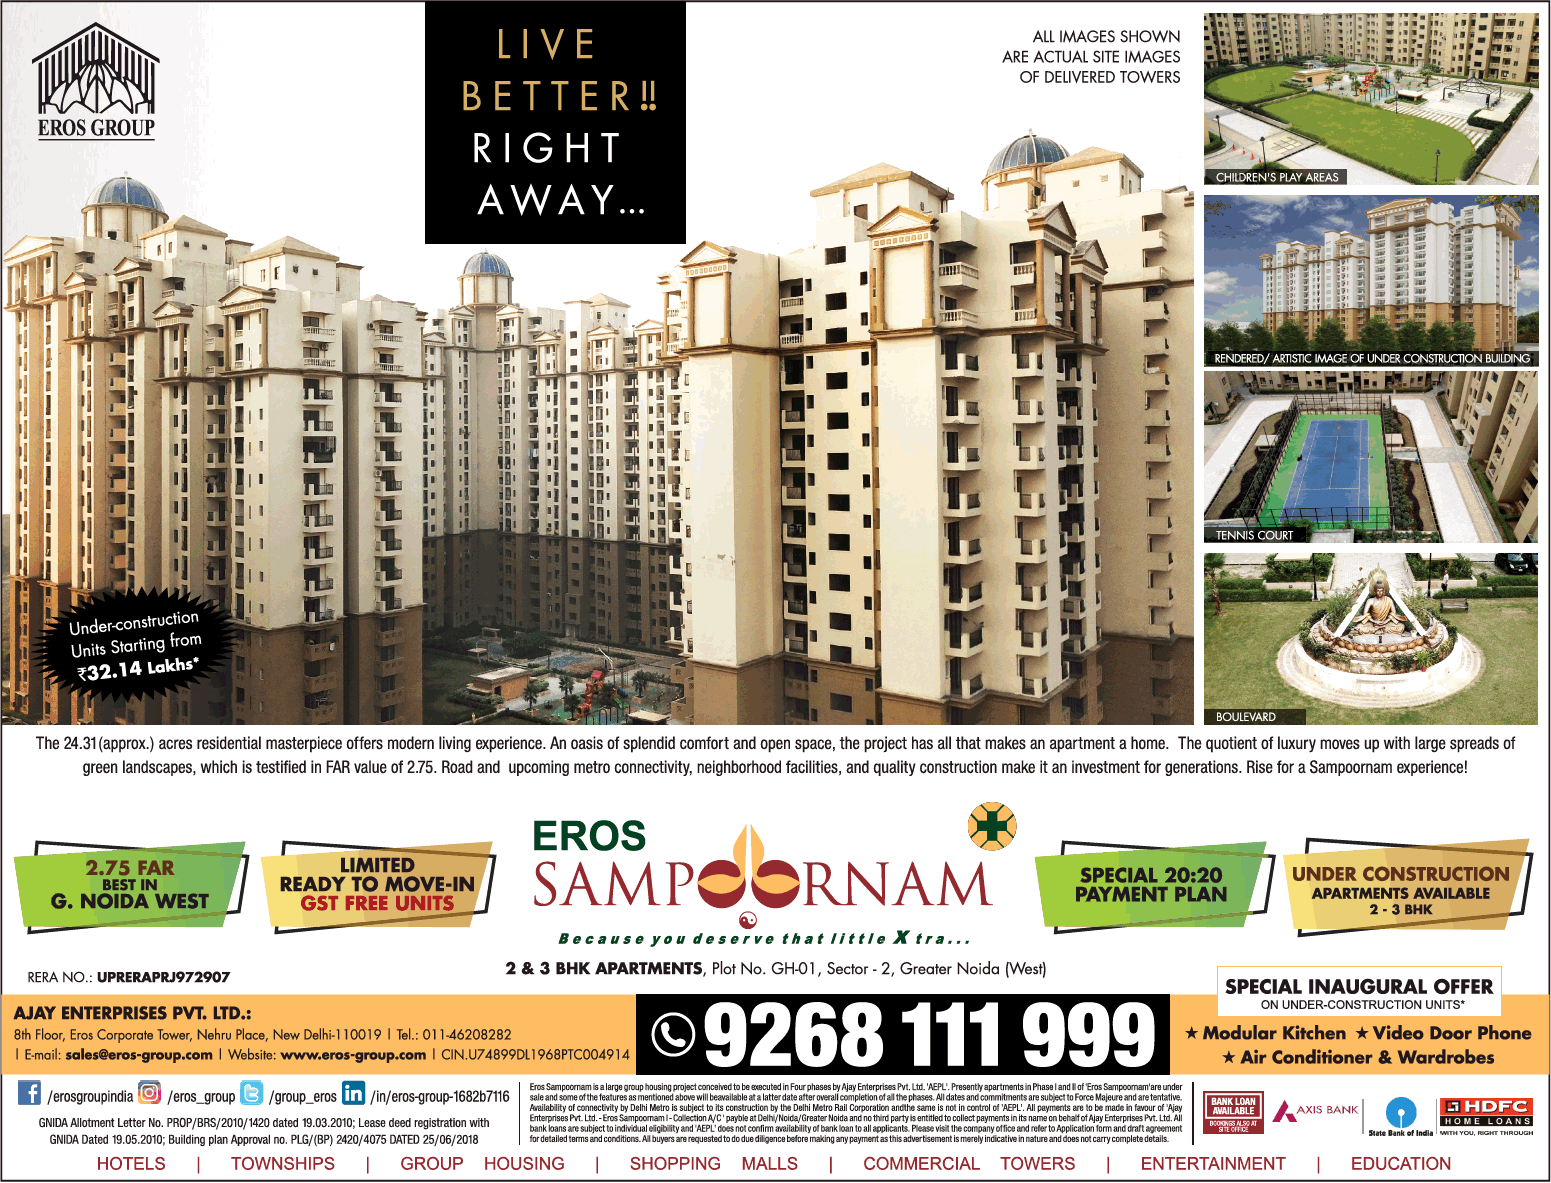 eros-group-sampoornav-under-construction-apartments-available-2-and-3-bhk-ad-delhi-times-10-05-2019.png